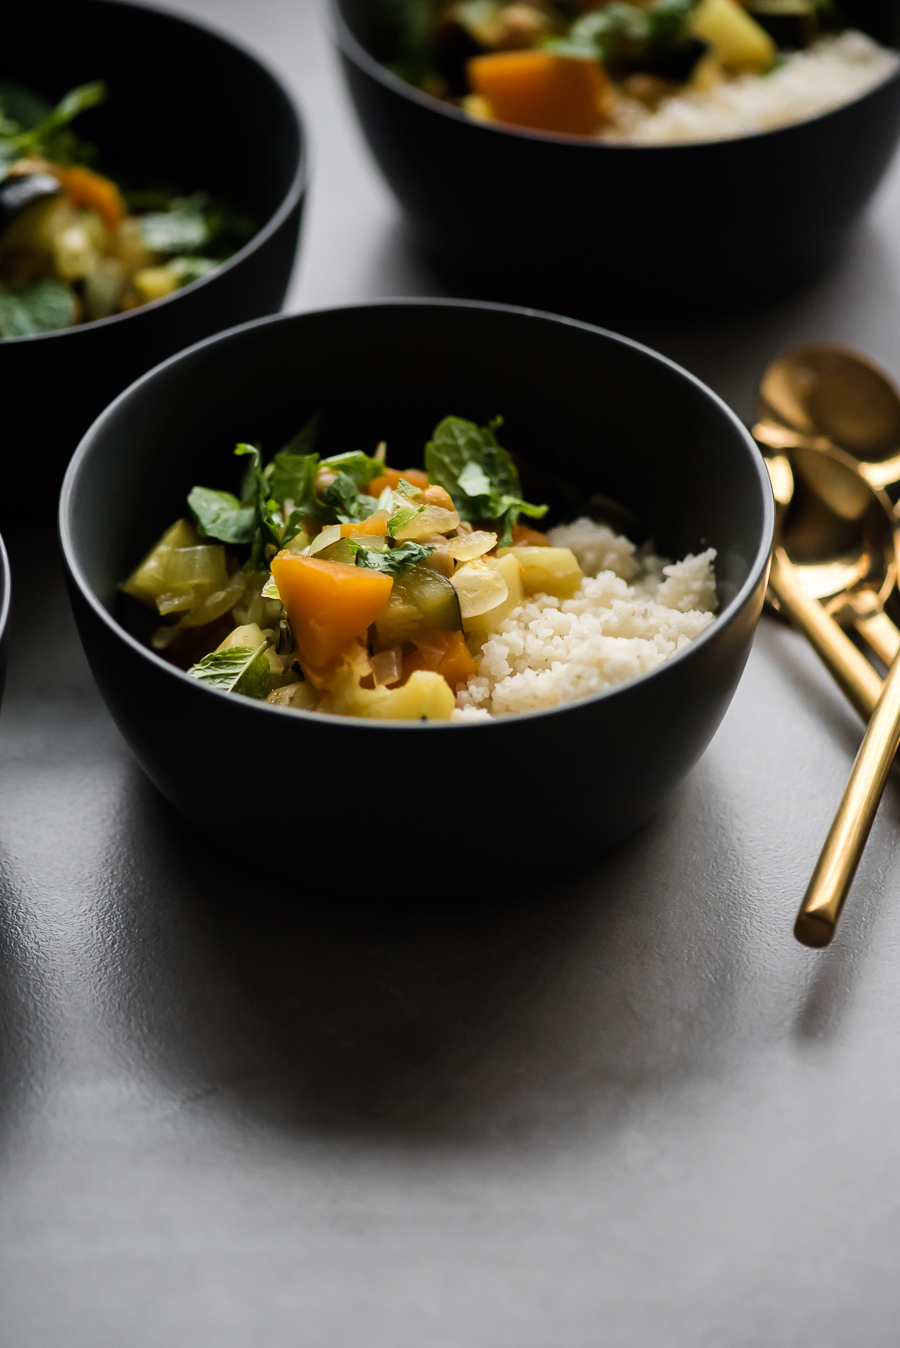 Moroccan Vegetable Stew with Couscous